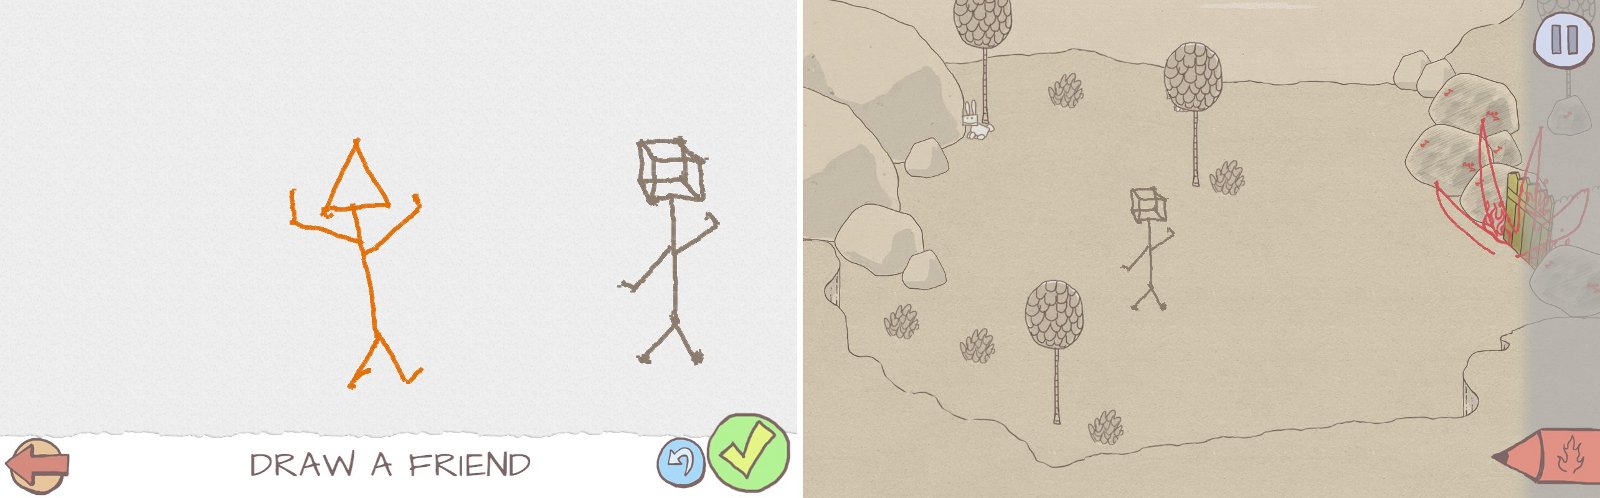 Draw a Stickman Adventure, RPG, and puzzle game in one